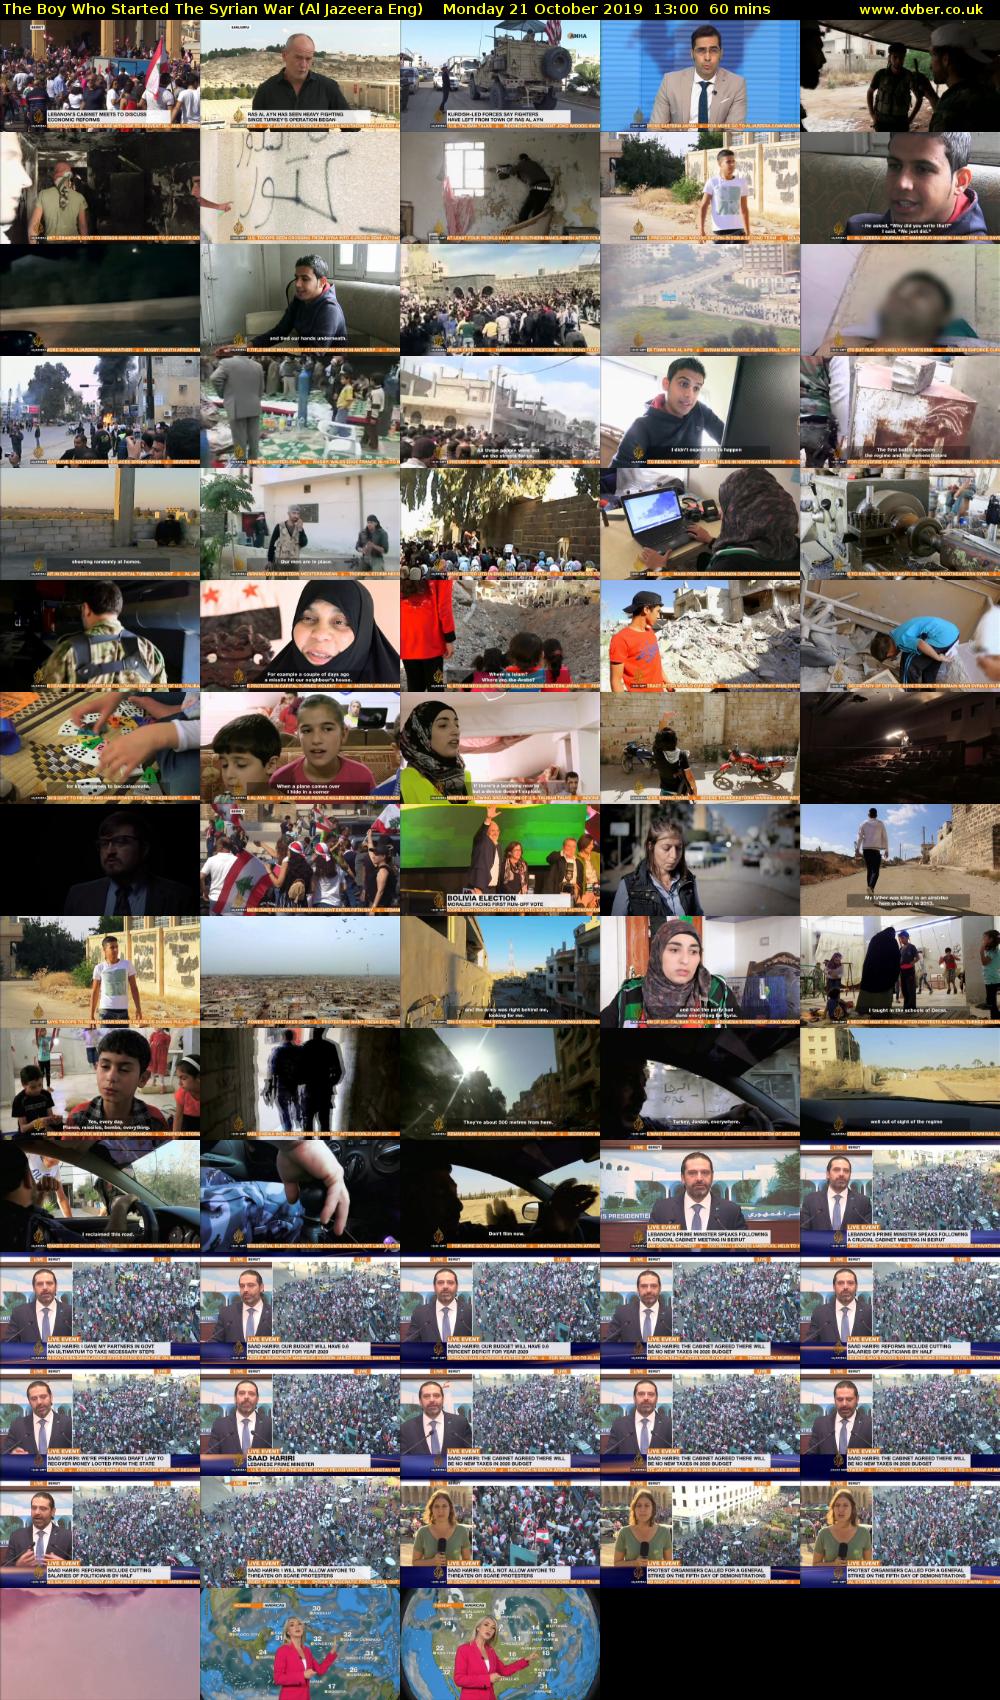 The Boy Who Started The Syrian War (Al Jazeera Eng) Monday 21 October 2019 13:00 - 14:00